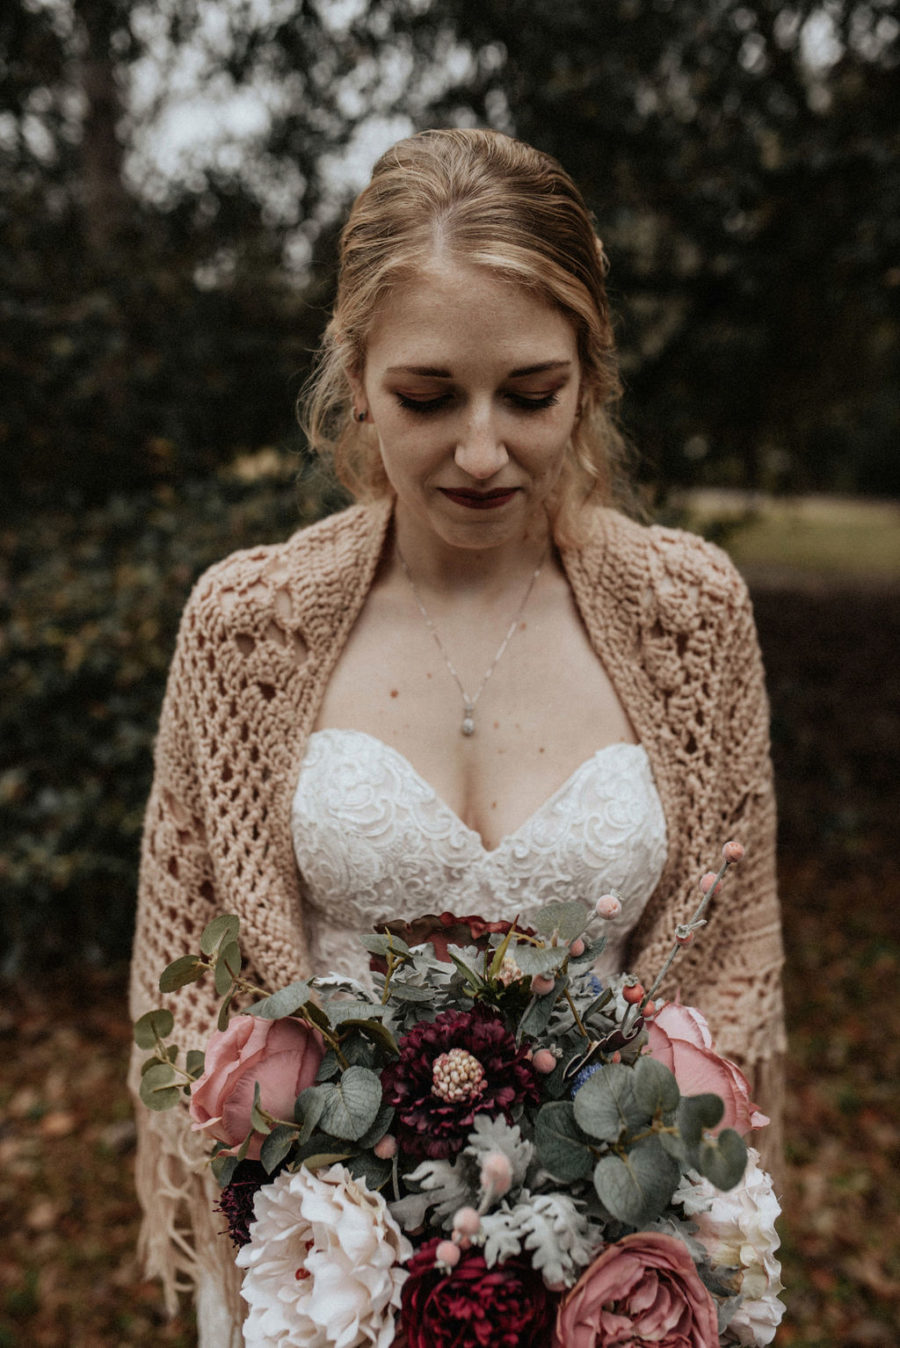 Bridal portrait: Magical Winter Wedding by Meghan Melia Photography featured on Nashville Bride Guide!